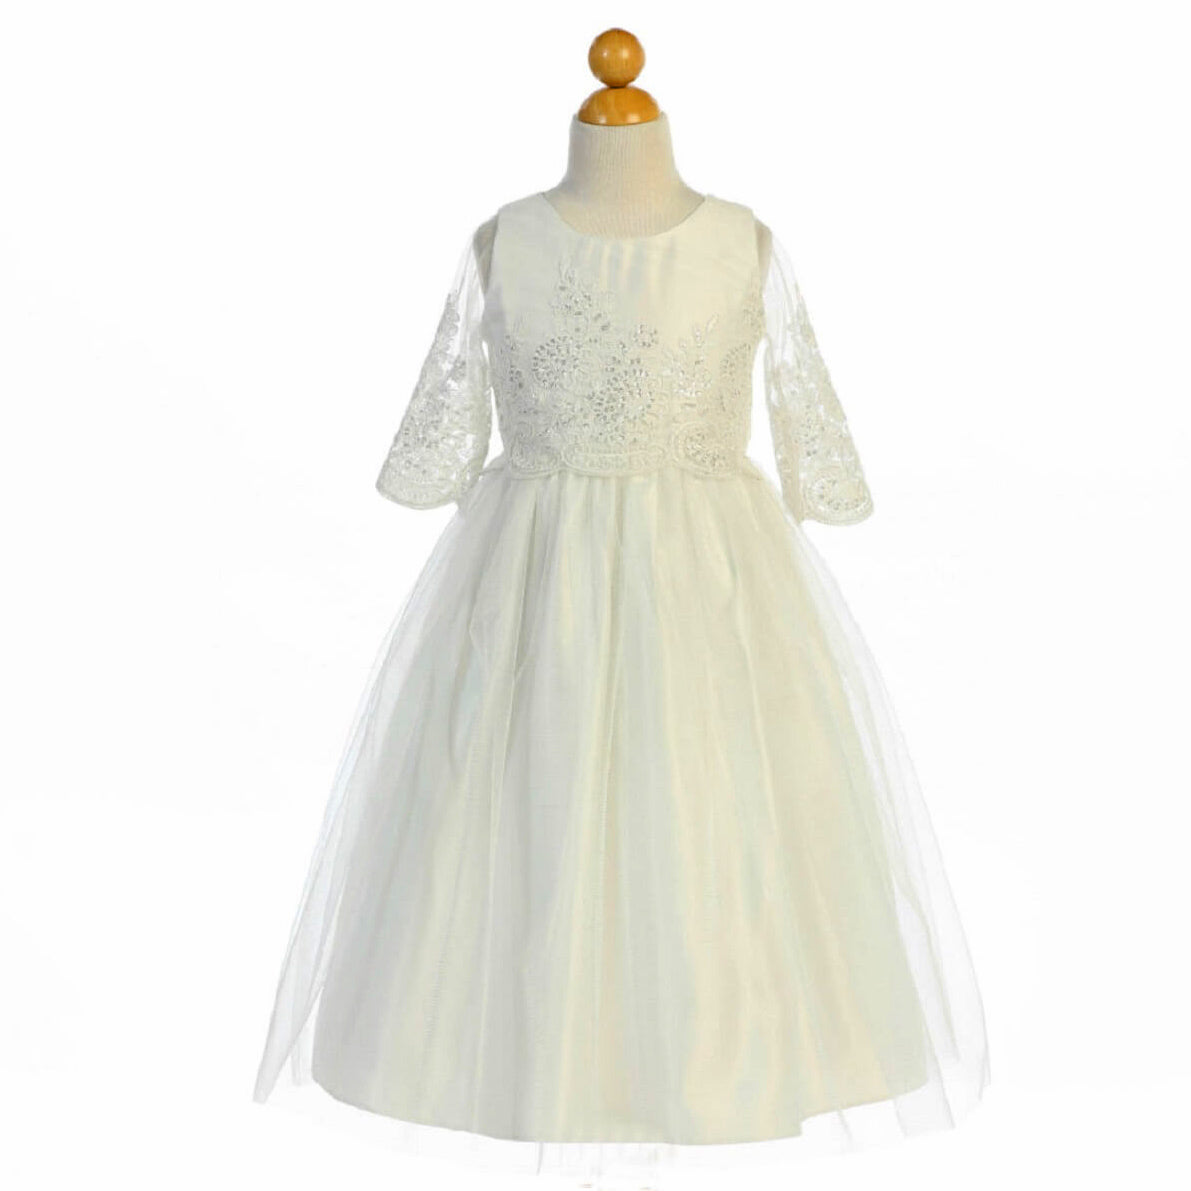 Harlow Dress by UK Flower Girl Boutique